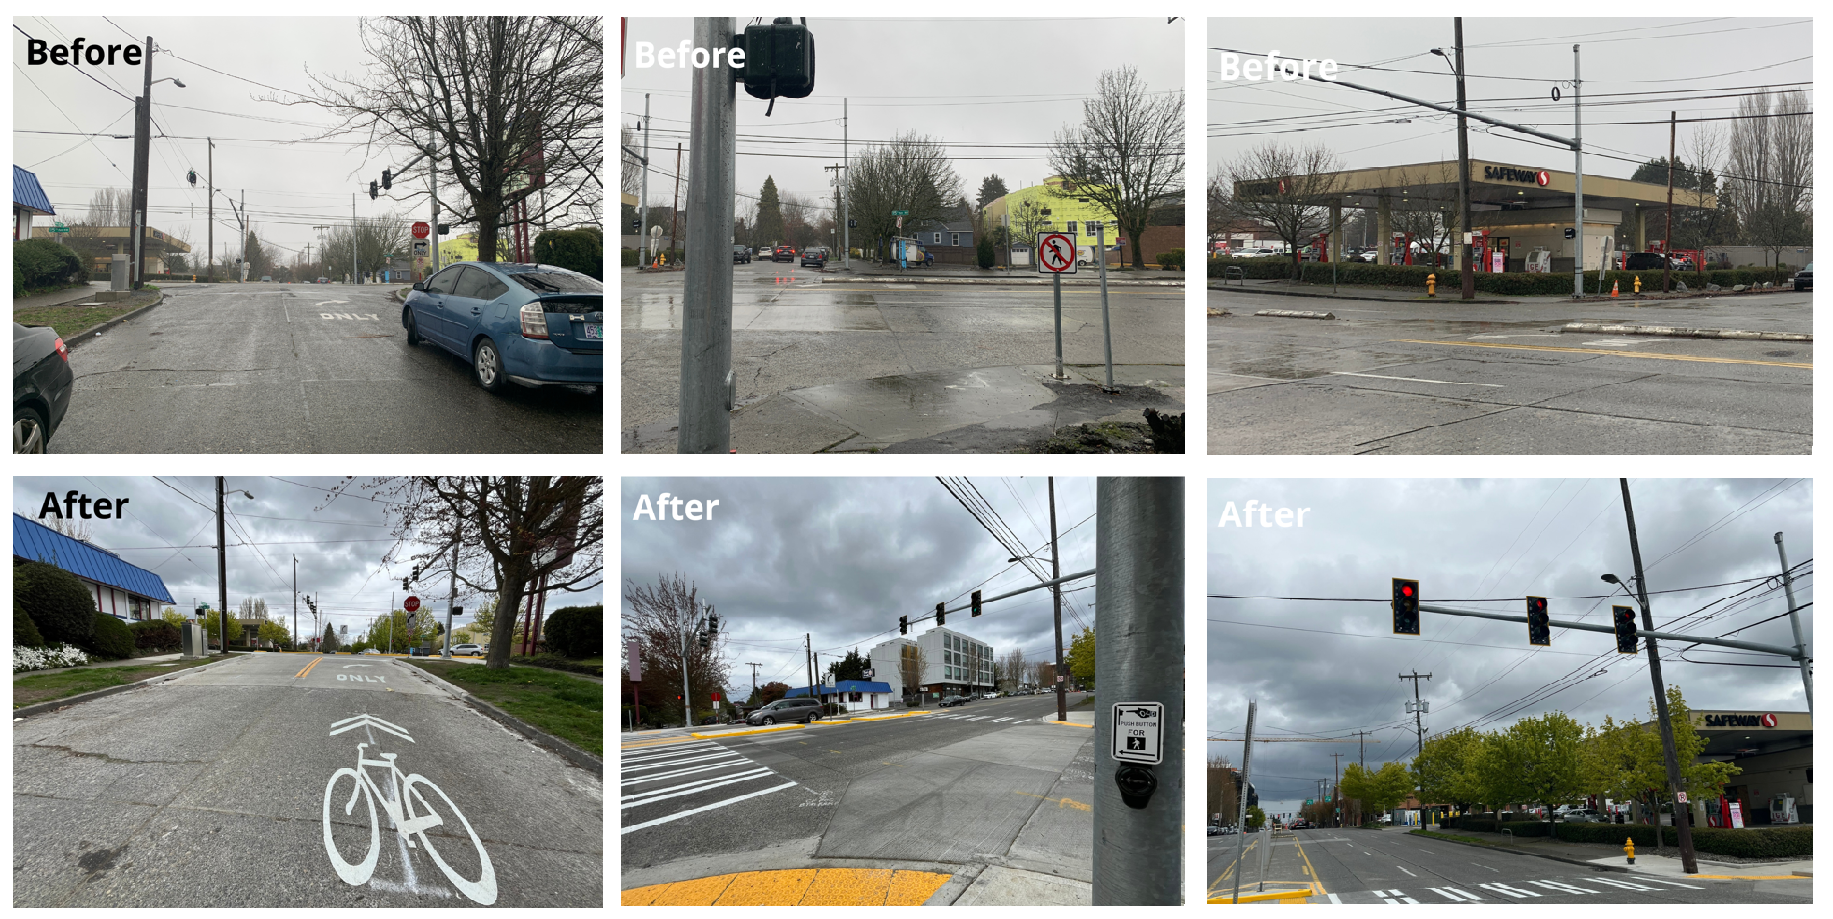 A series of before and after pictures showing new crossings for east and westbound bikes, new pedestrian bike signalat 15th Ave and NW 83rd, and new pedestrian and bike signal on 15th Ave NW and NW 83rd street from a different angle